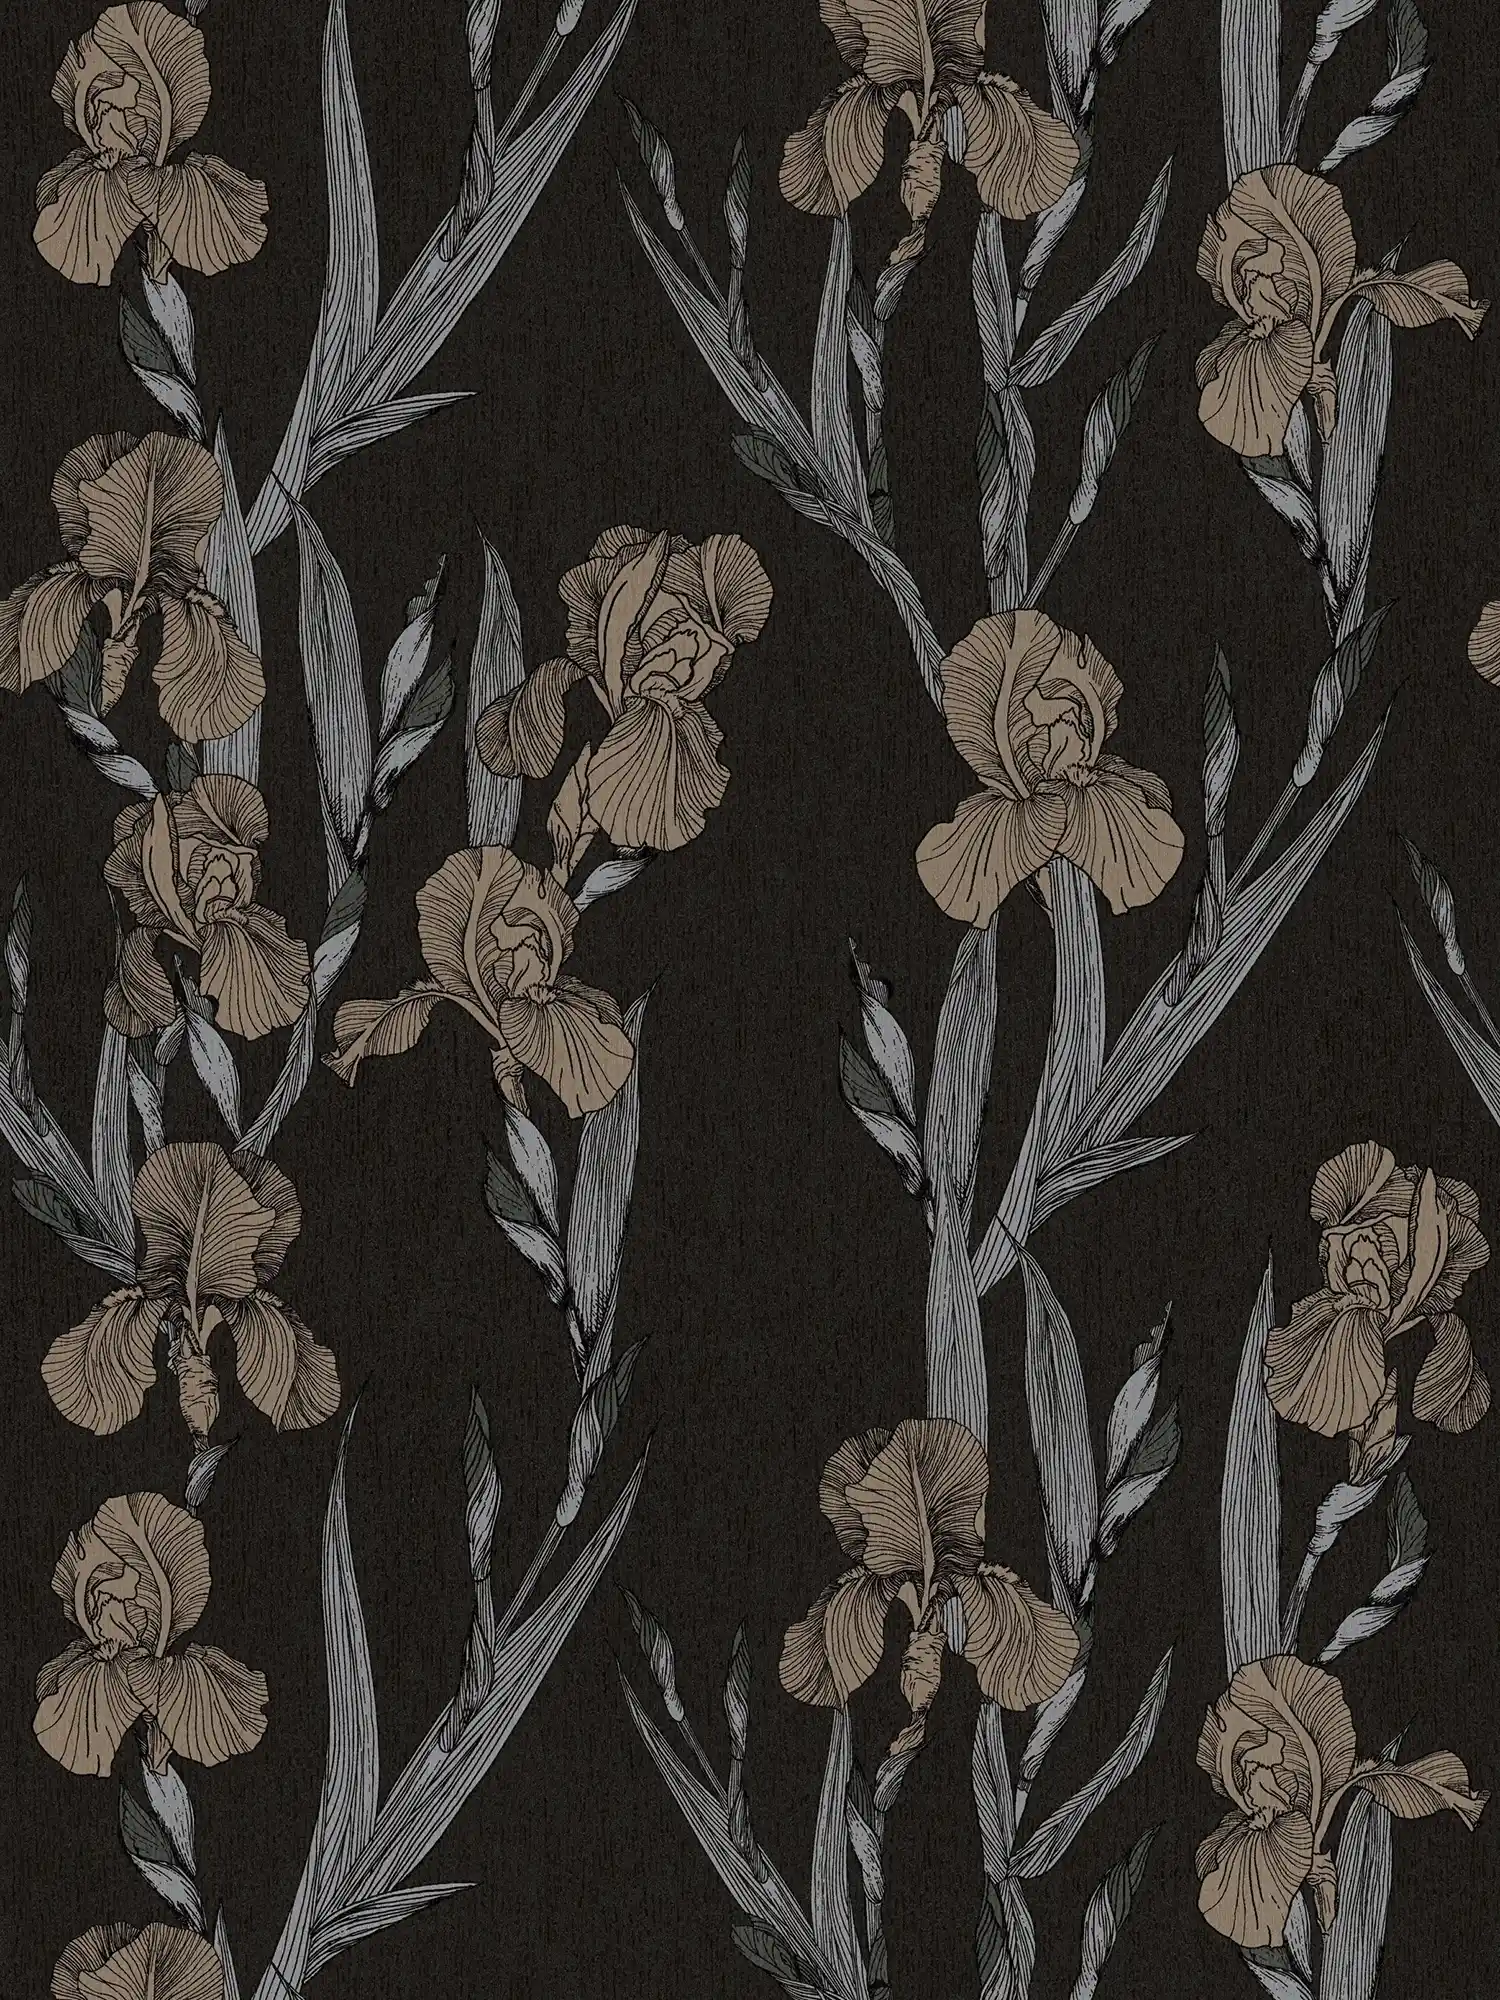 Floral pattern wallpaper with flowers in drawing style - black, grey, brown
